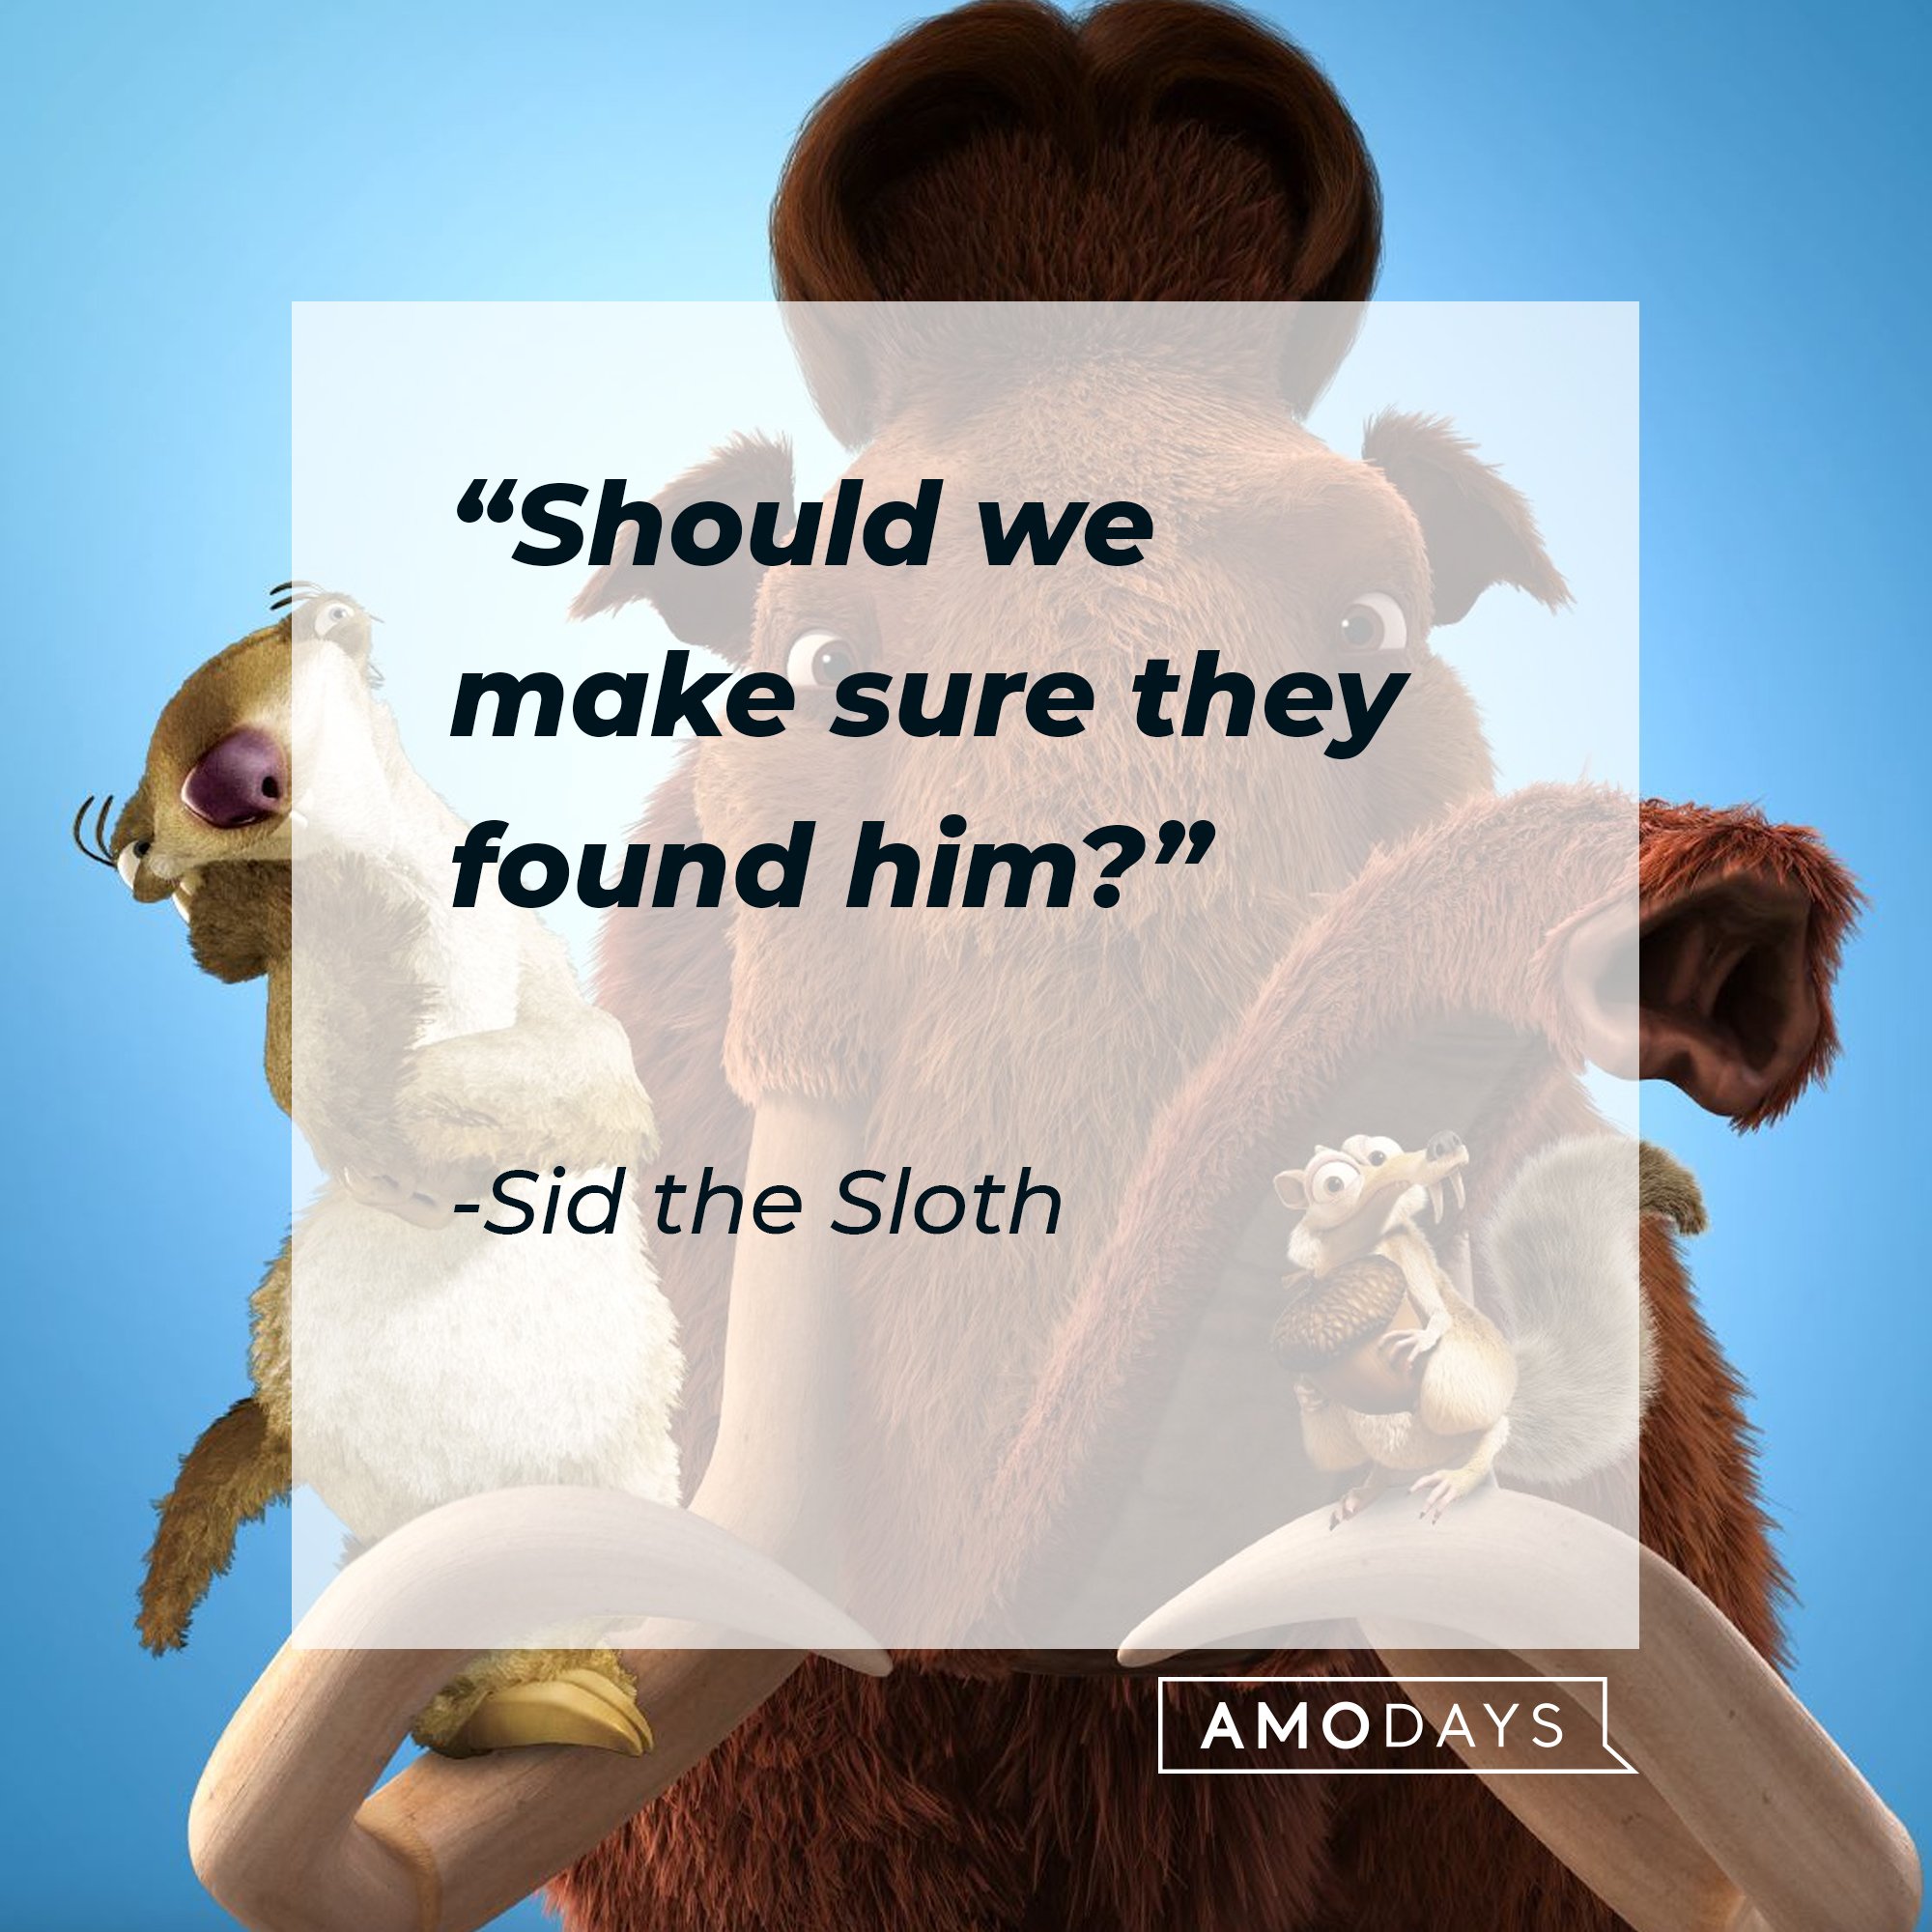  Sid the Sloth's quote: “Should we make sure they found him?” | Image: AmoDays